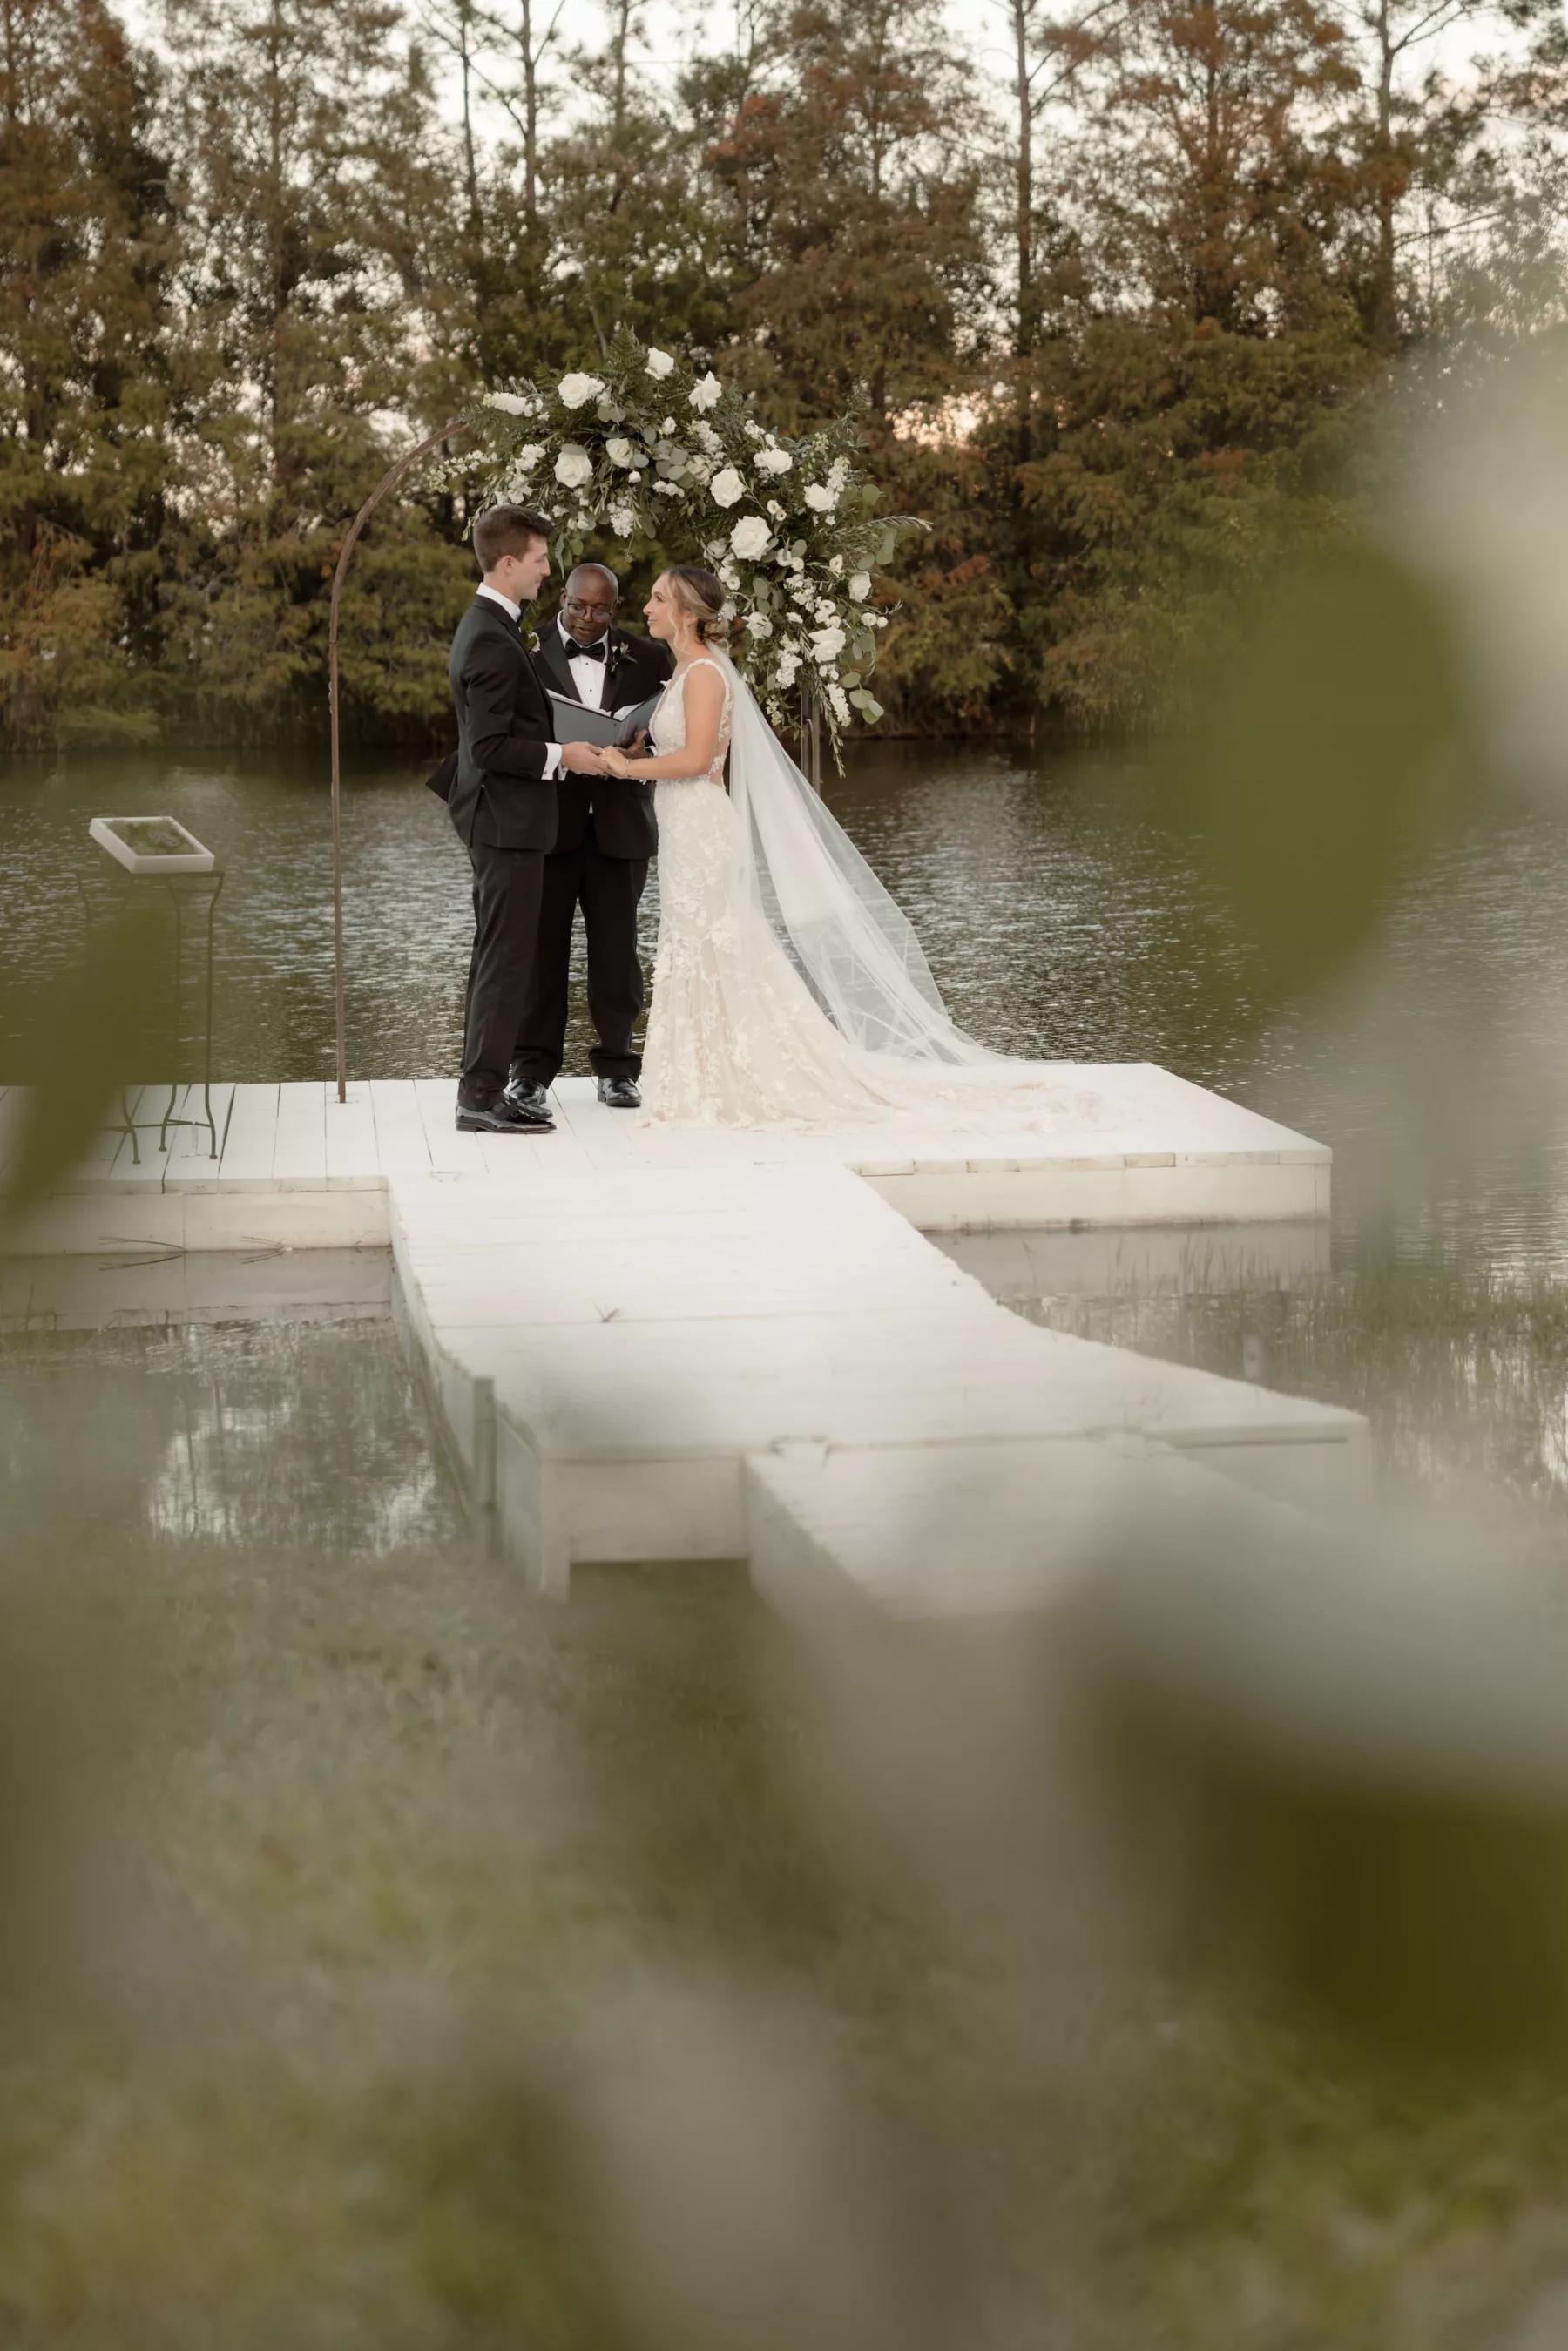 Timeless Fall Lakeside Wedding Ceremony Inspiration | Central Florida Photographer and Videographer Evoke Photo and Film